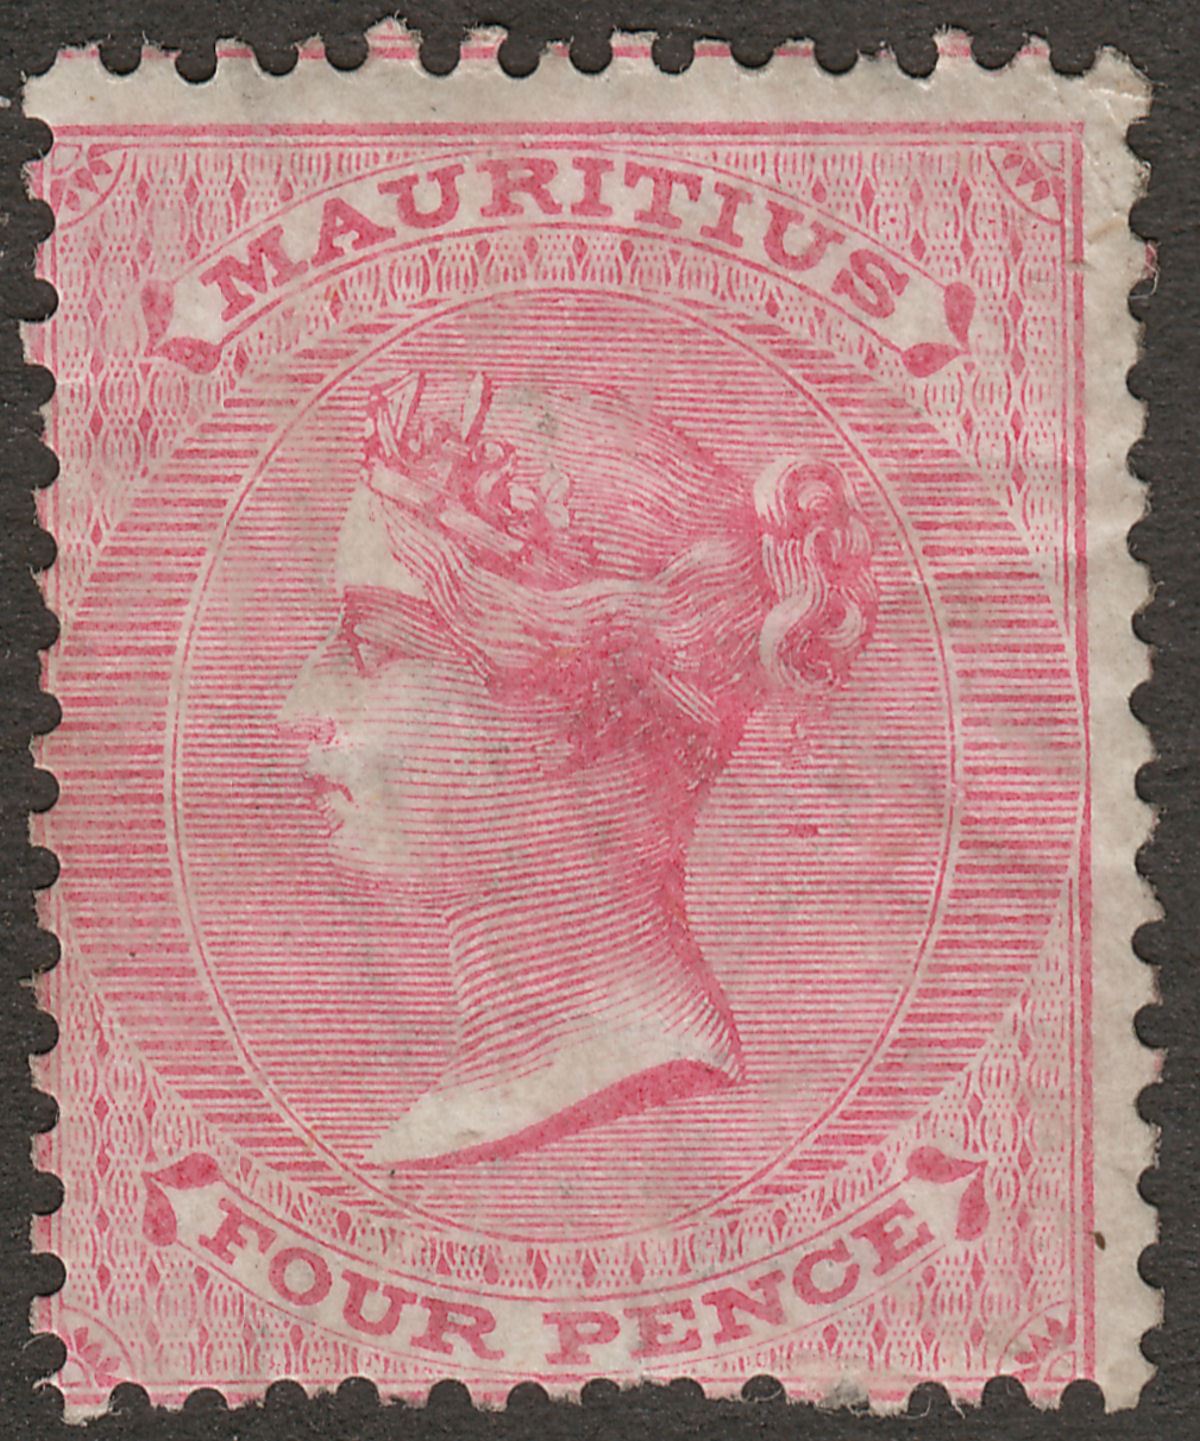 Mauritius 1863 QV 4d Rose Mint SG62 cat £95 with creasing